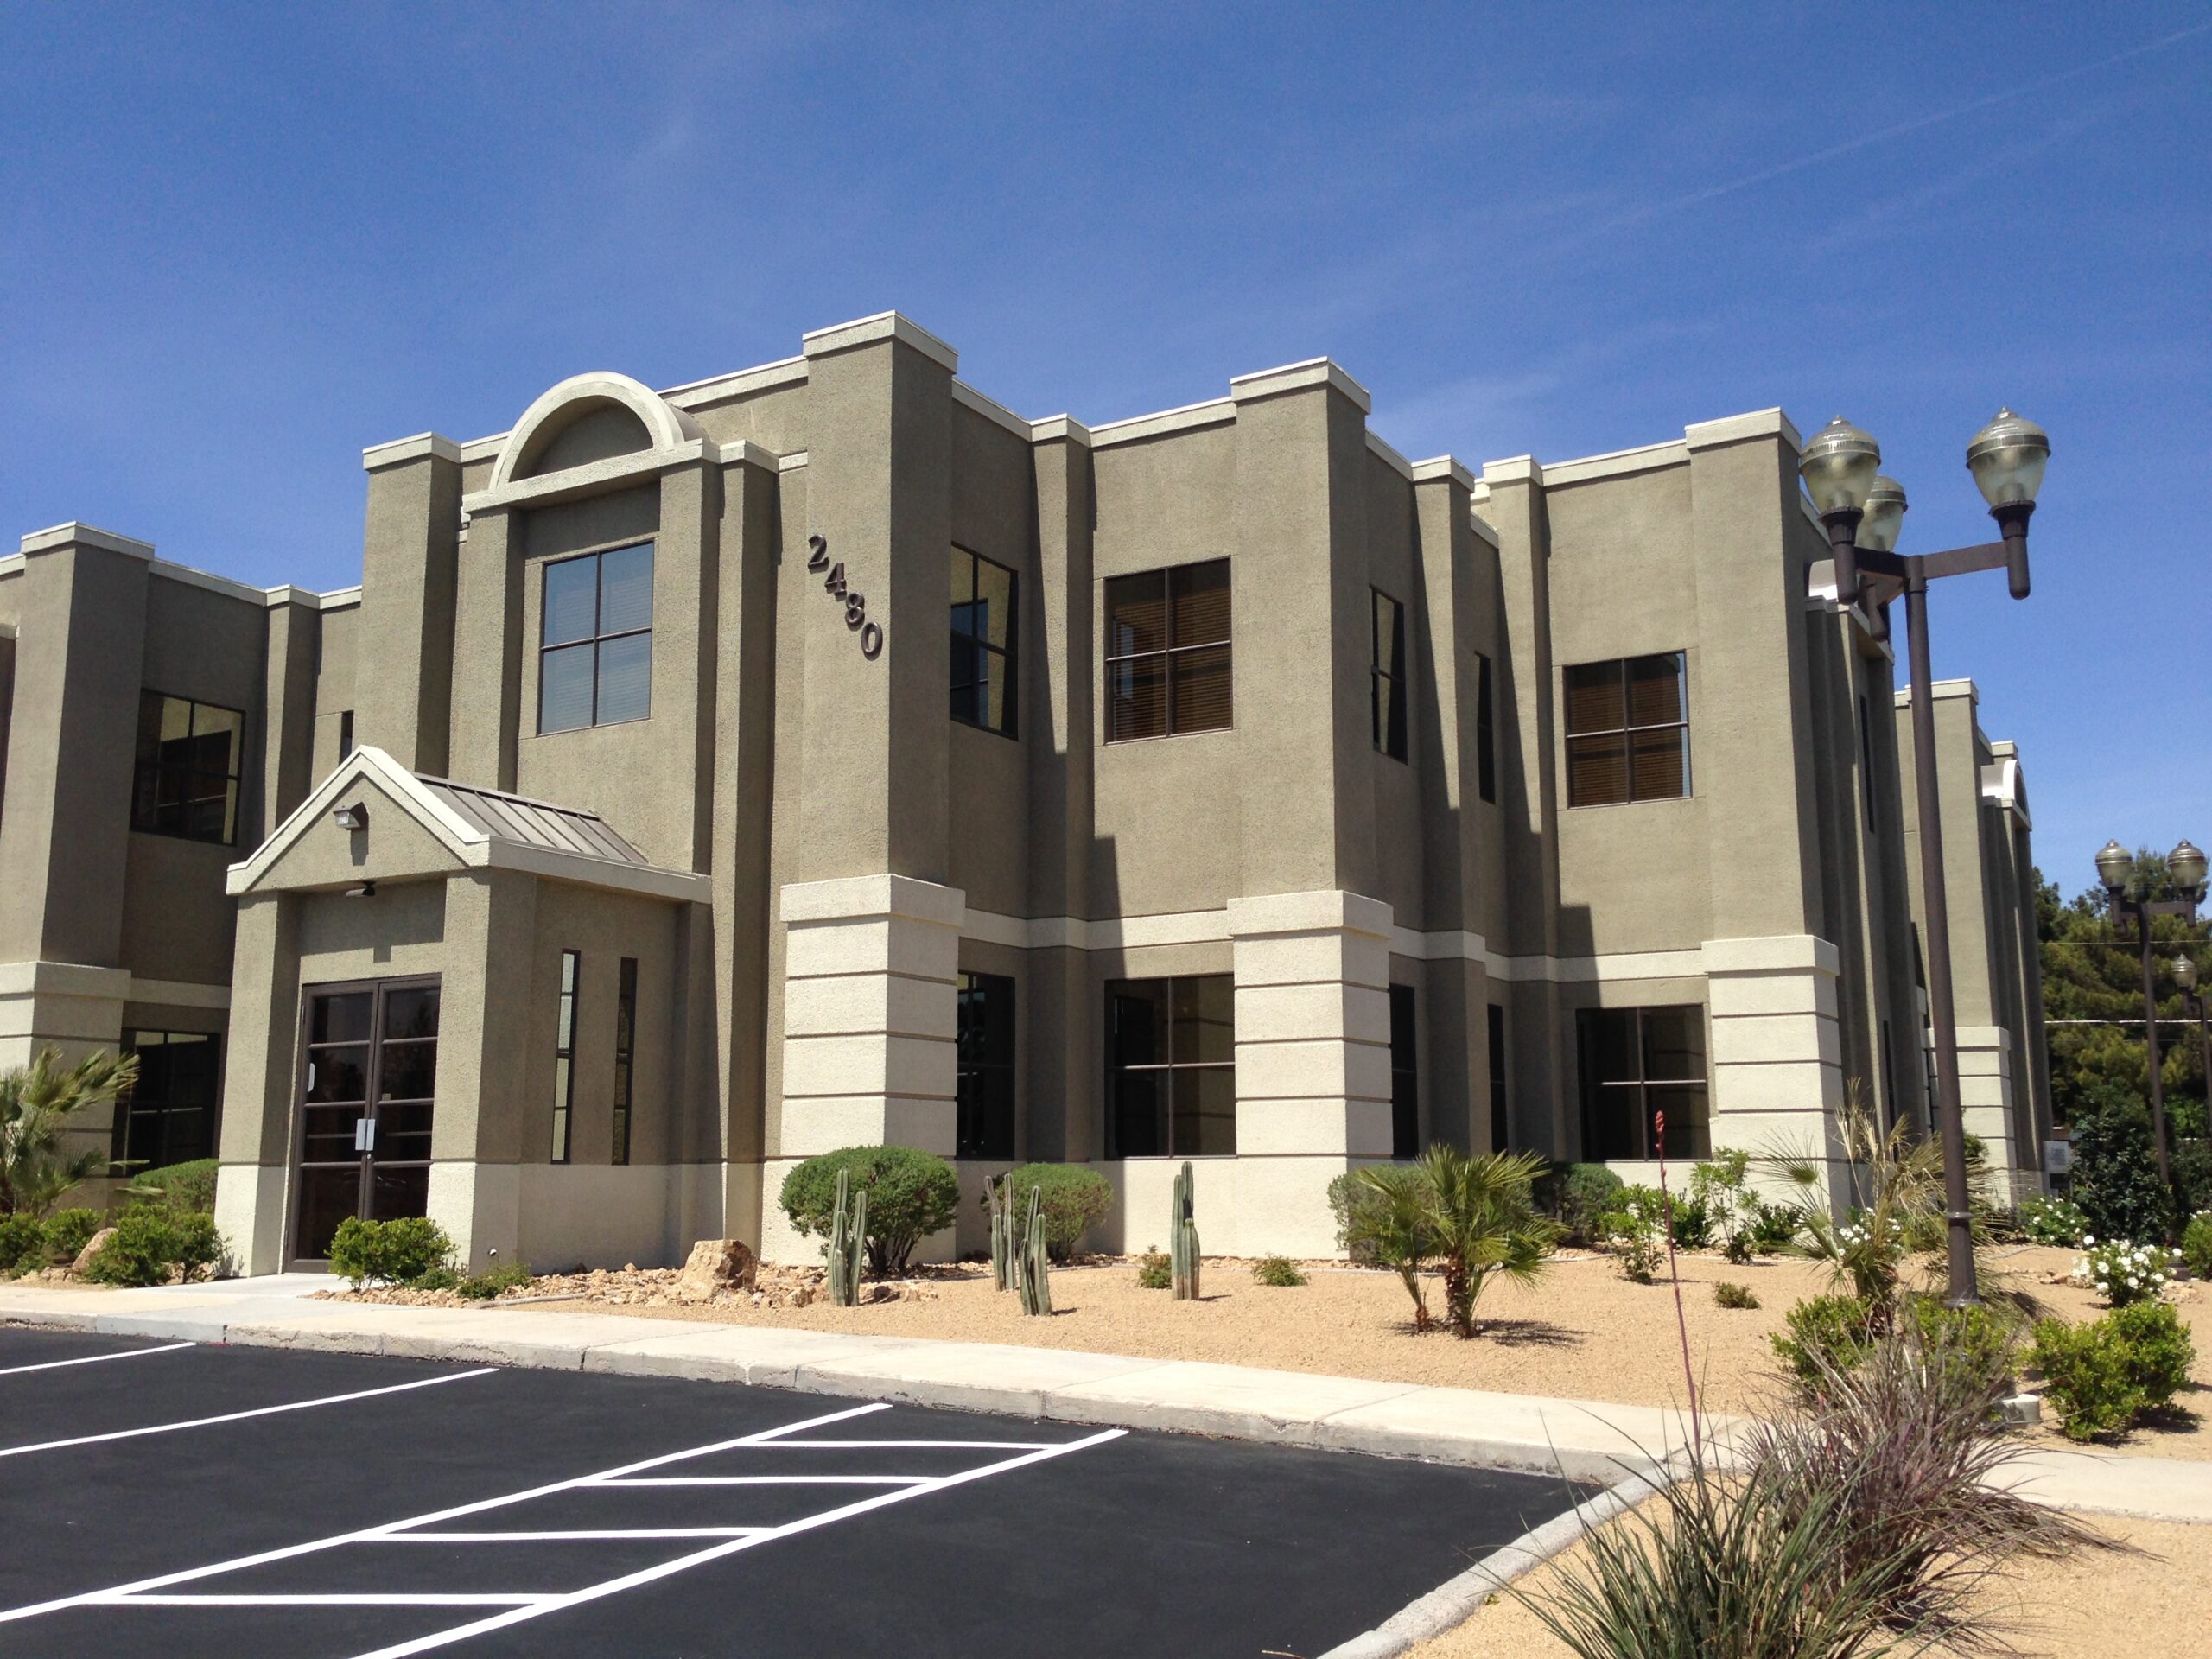 Colliers International – Las Vegas finalized an approximately 1,600-square-foot medical office property located at 2480 E. Tompkins Ave. in Las Vegas.